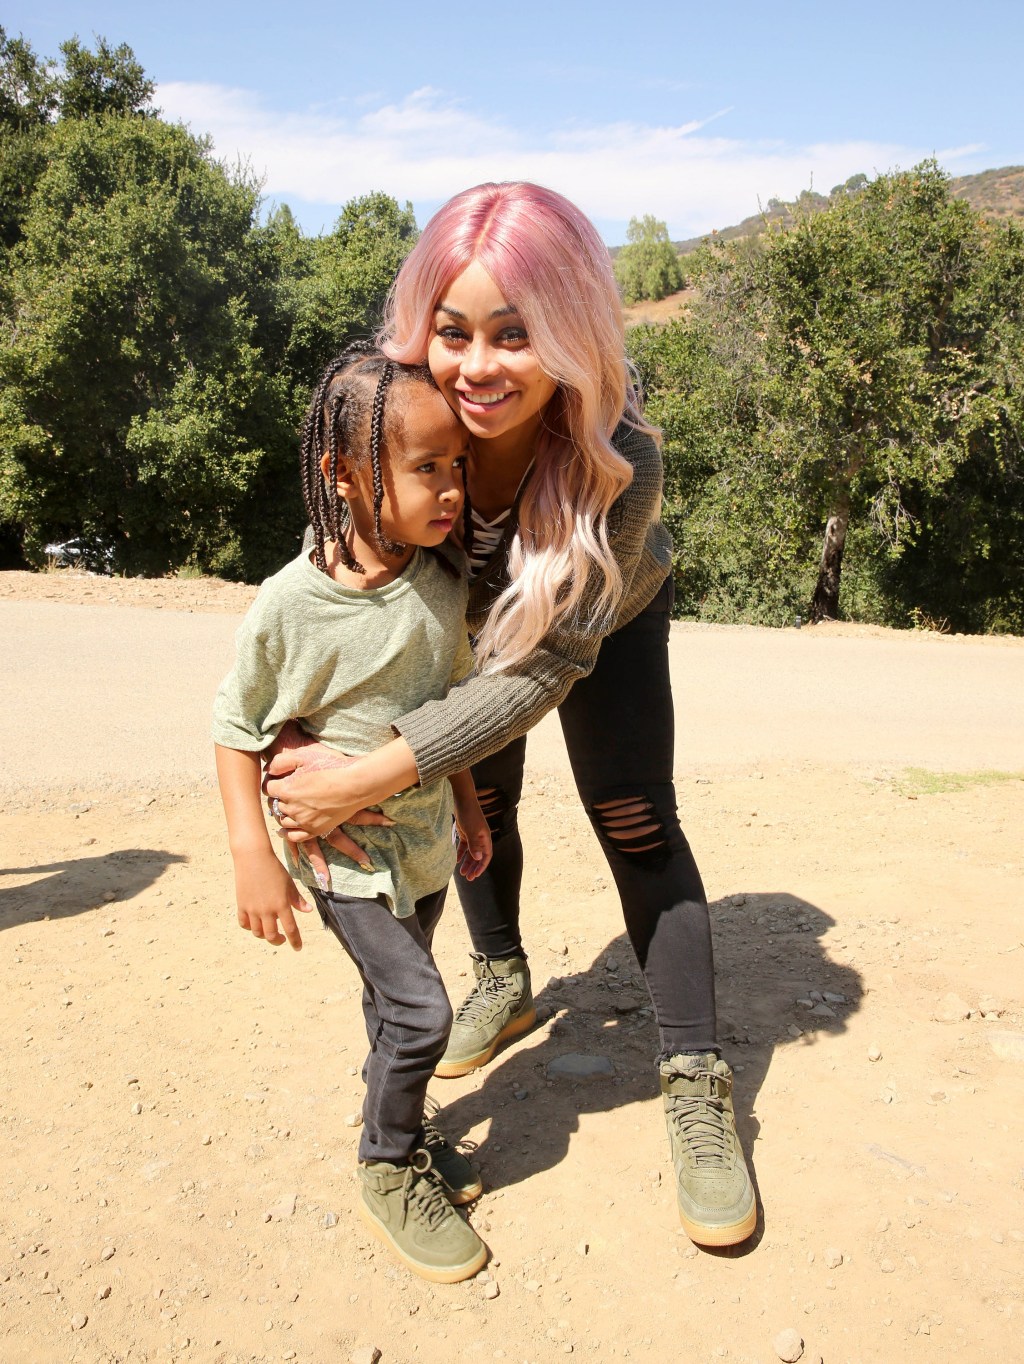 Blac Chyna and her son, King